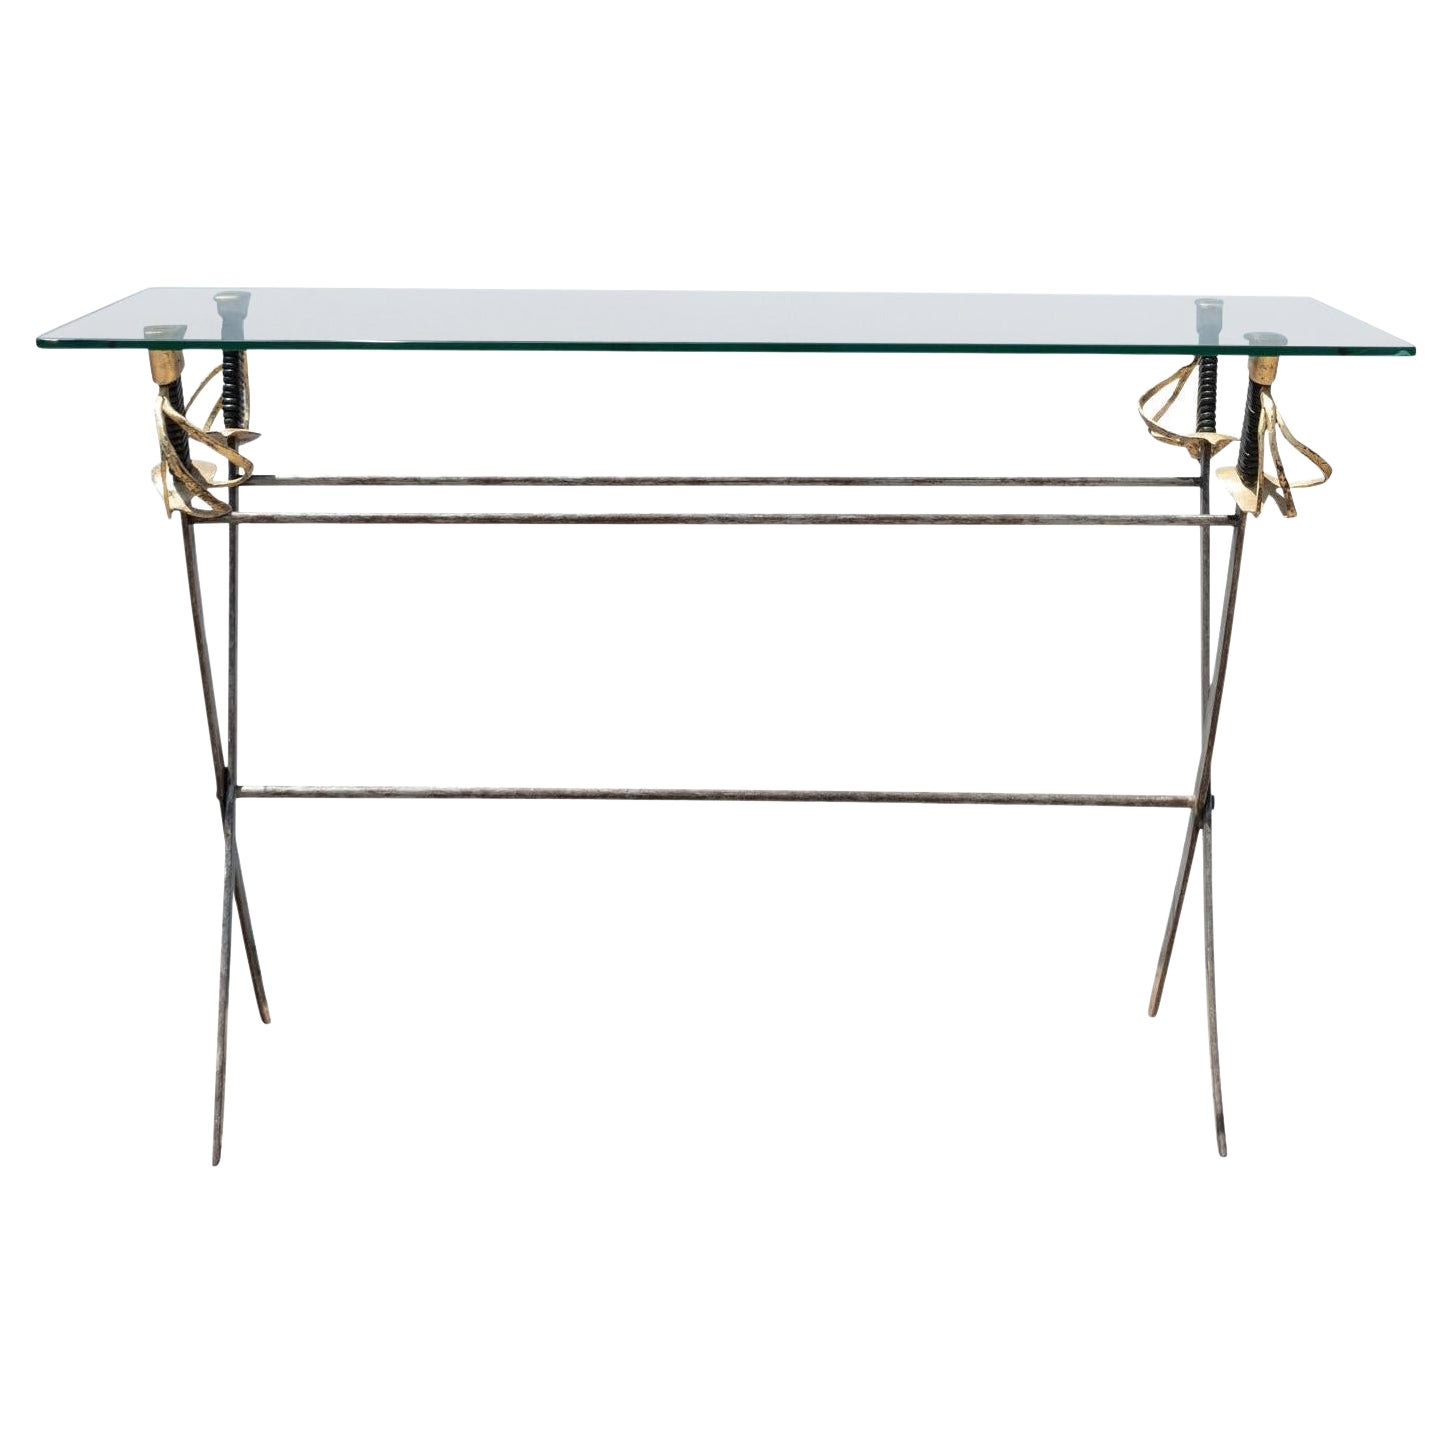 French Maison Jansen Attributed Steel And Brass Sword Console Table For Sale